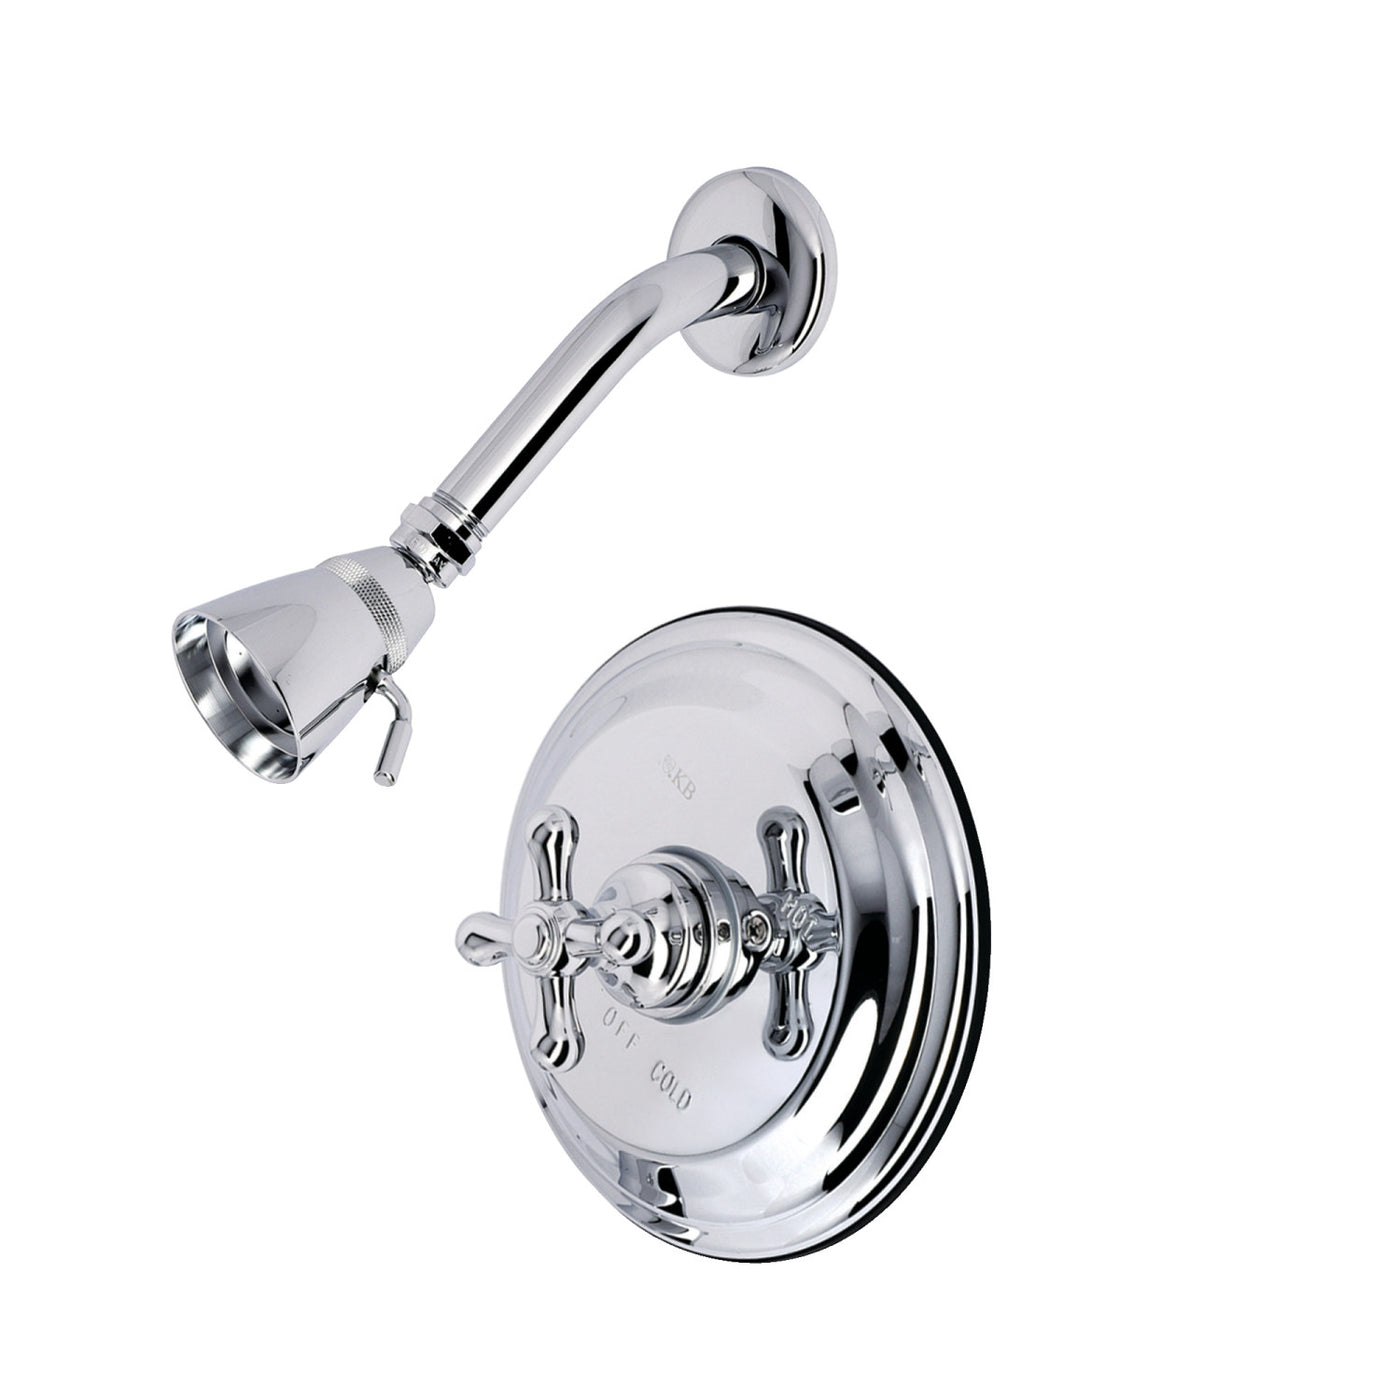 Elements of Design EB3631AXSO Pressure Balanced Shower Faucet, Polished Chrome